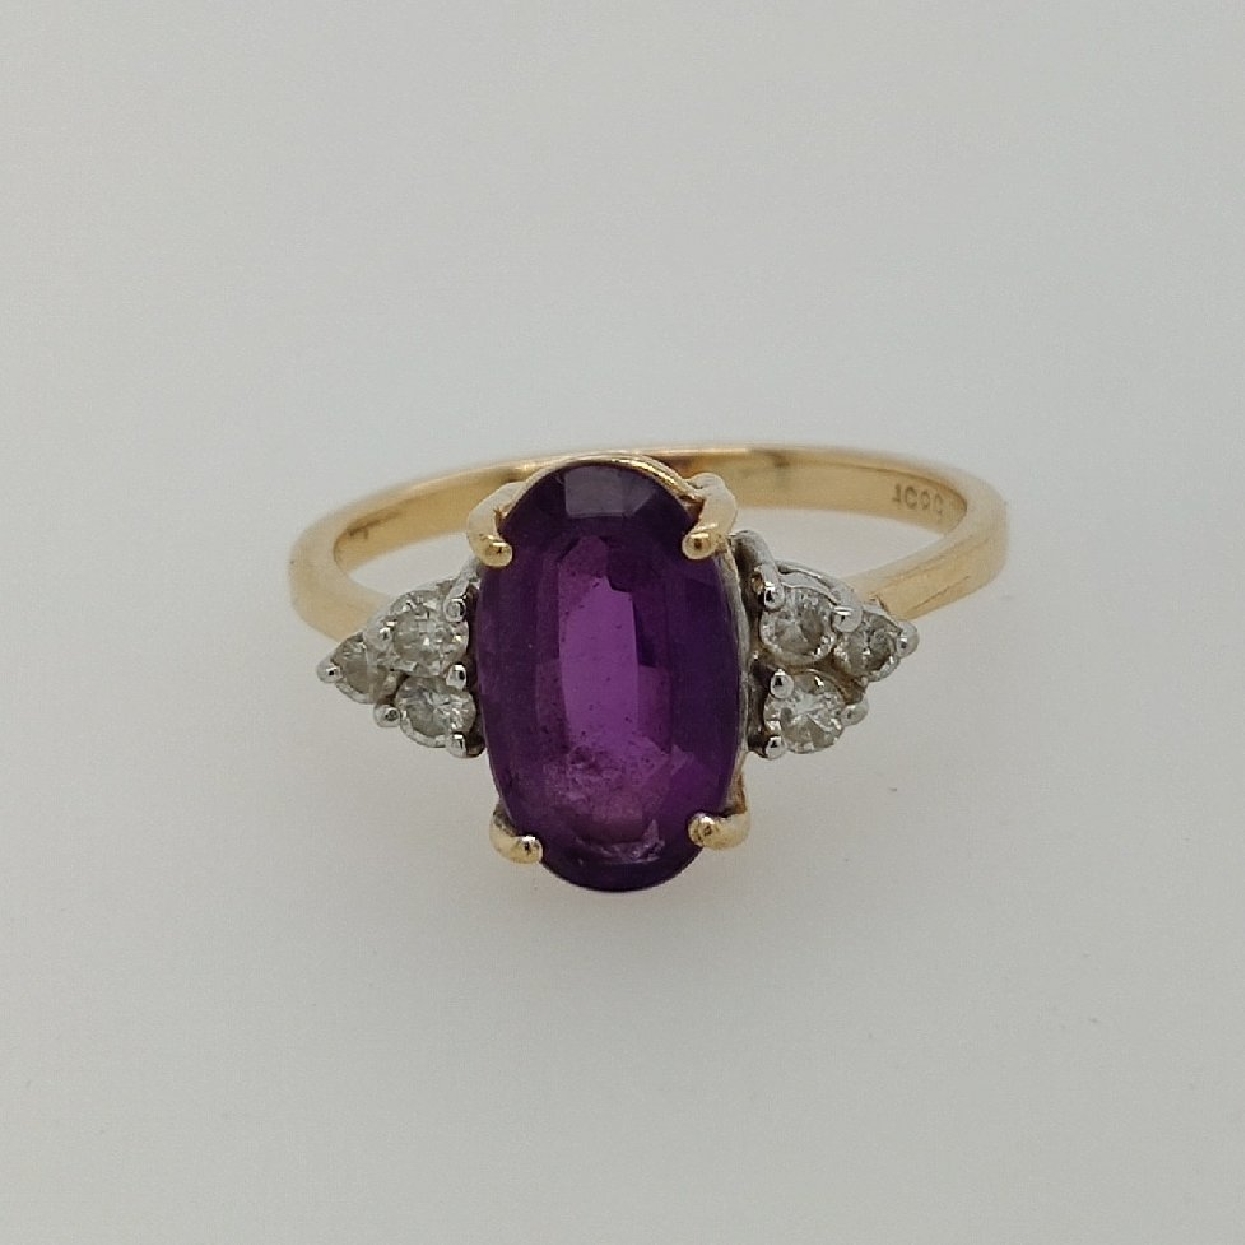 14K Yellow Gold Oval Purple Sapphire Ring with 6 Diamond Accents; Size 6.25